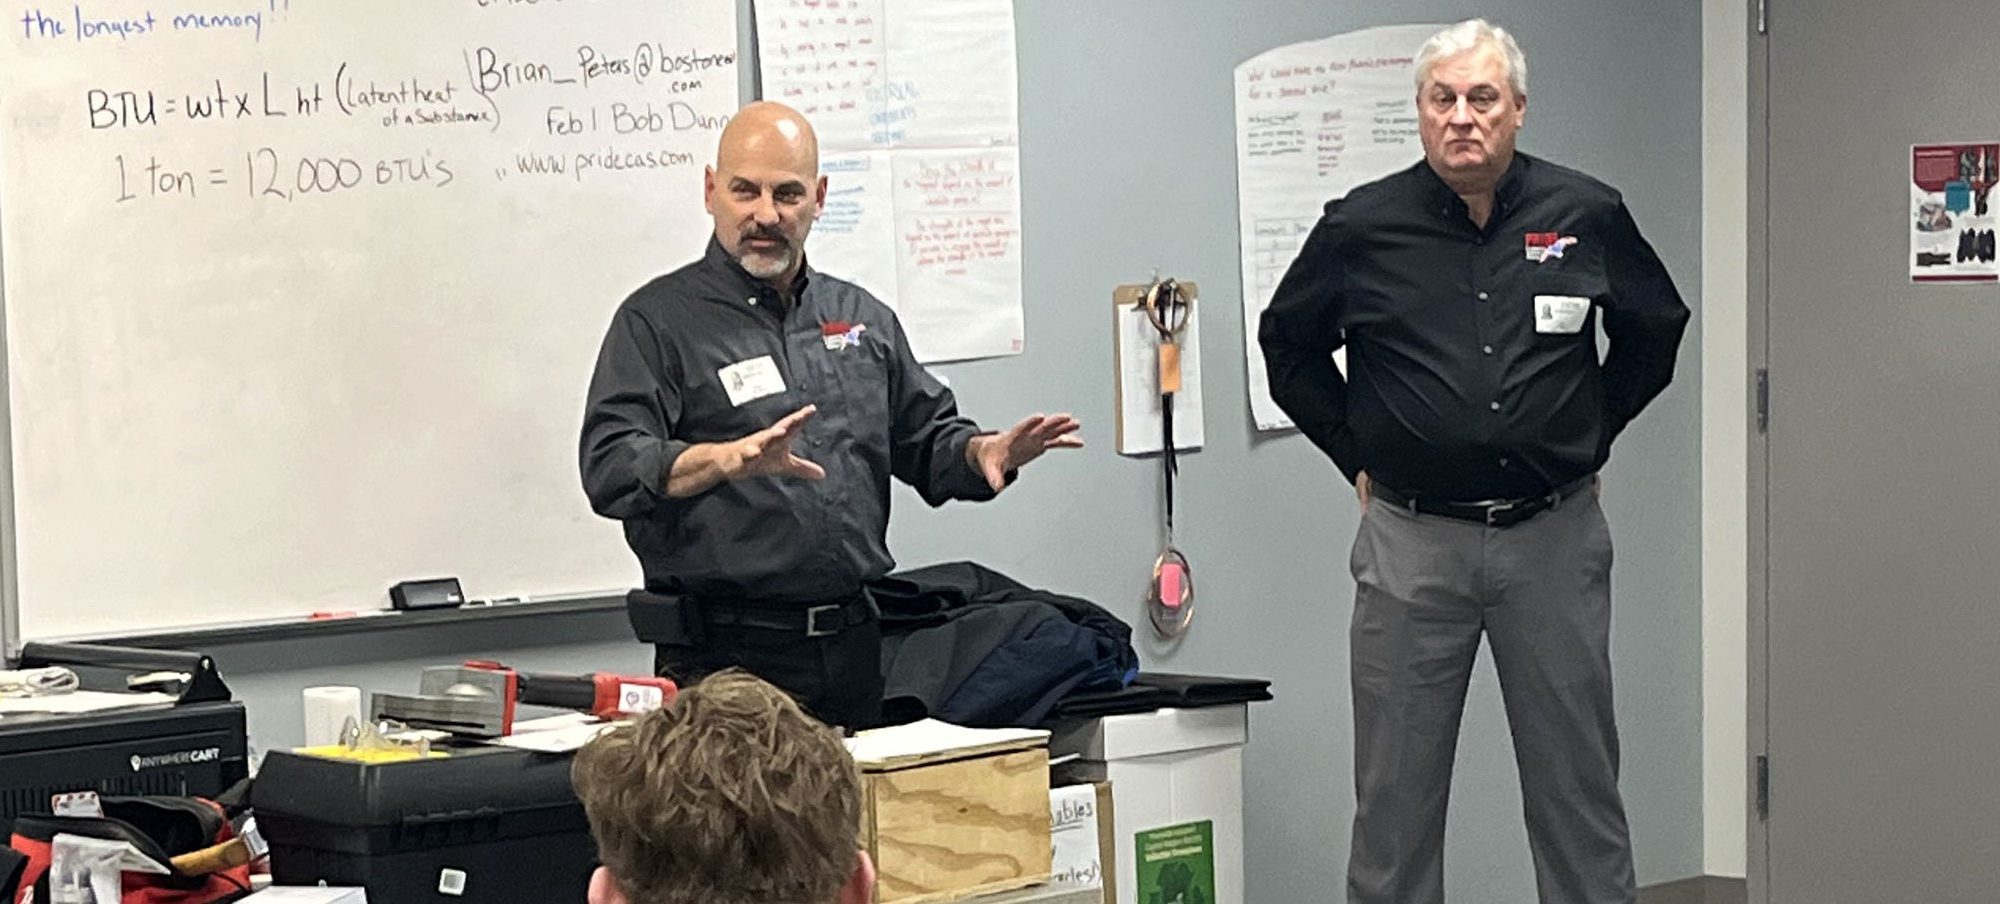 Two gentlemen in dark company shirts speak before a classroom of students.